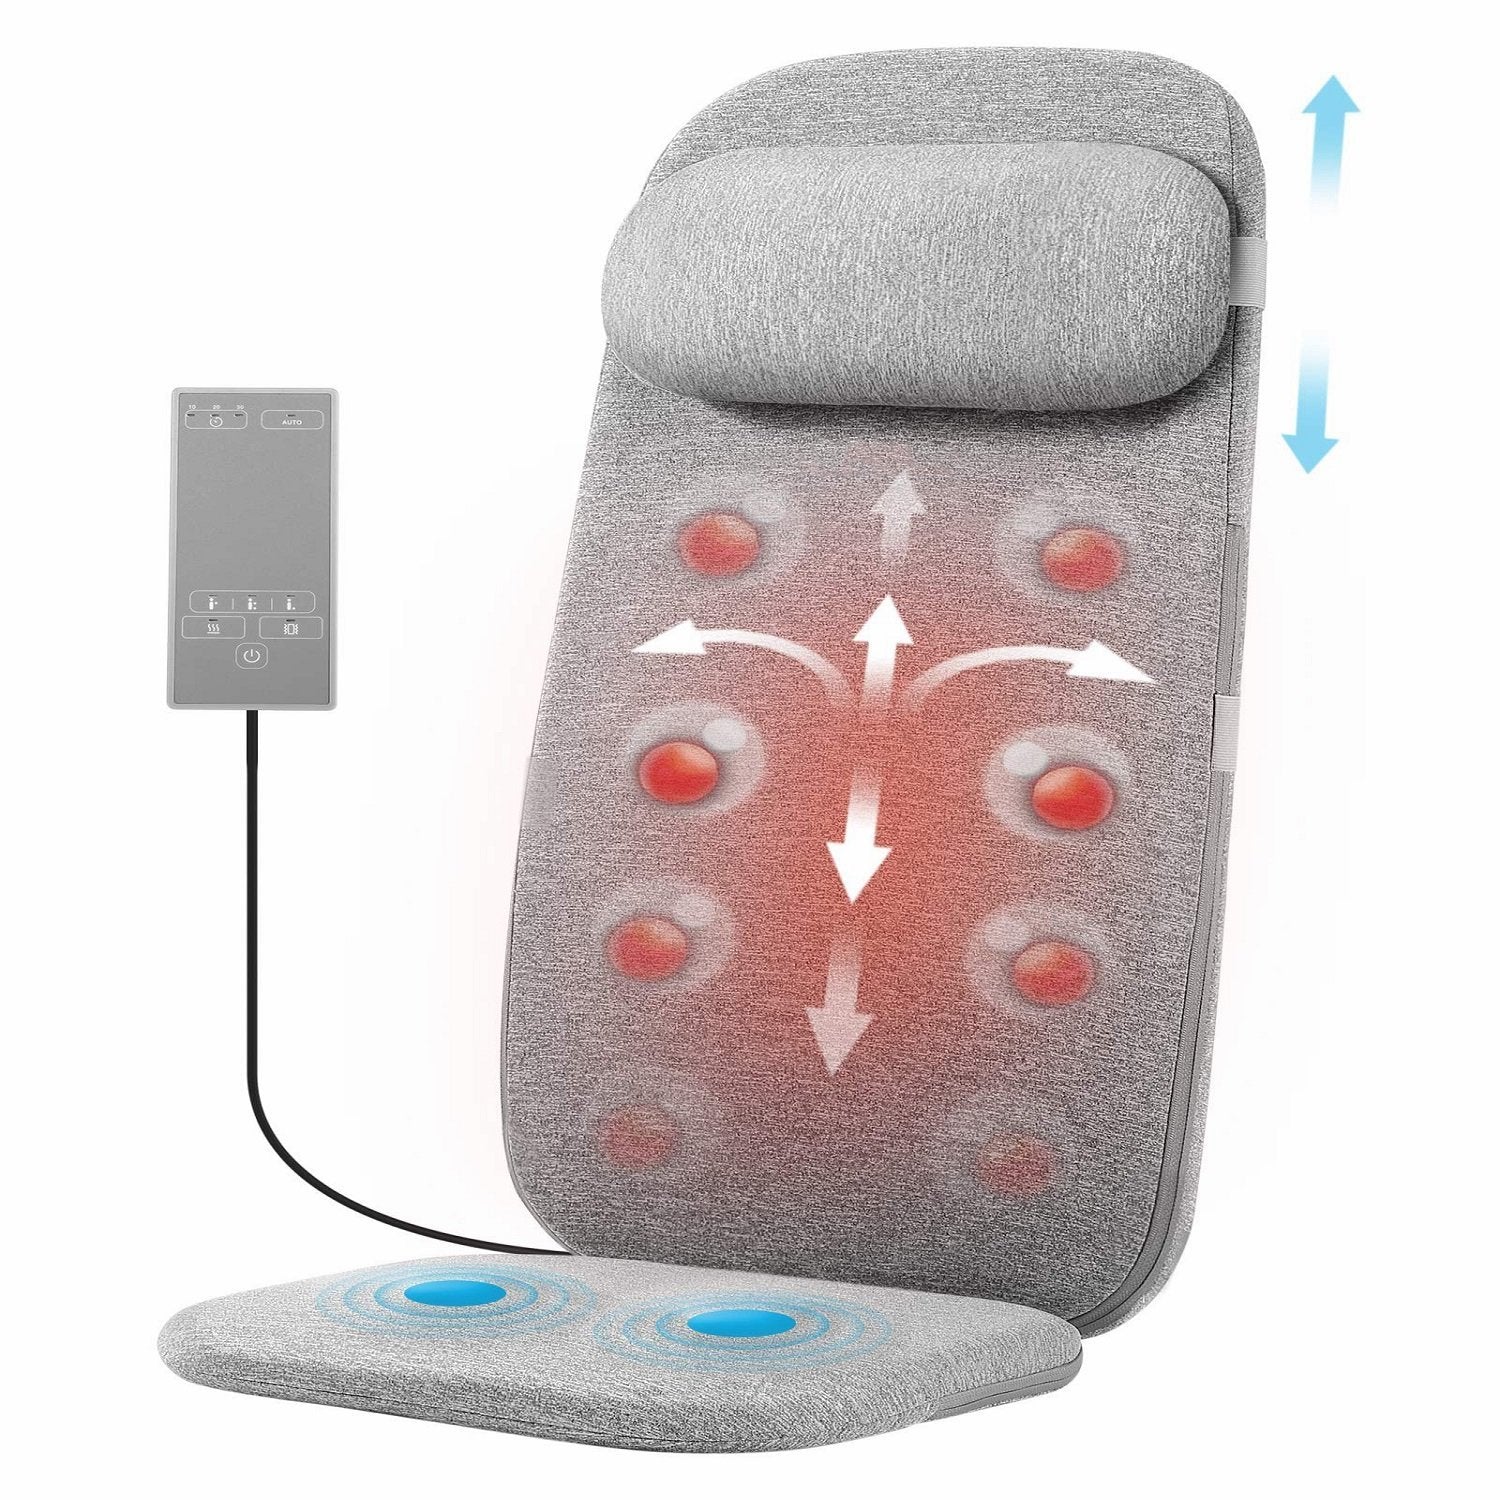 Load image into Gallery viewer, Naipo Shiatsu Massage Cushion with Heat and Vibration, Massage Chair Pad to Relax Full Back, Shoulders, Lumbar and Thighs - NAIPO
